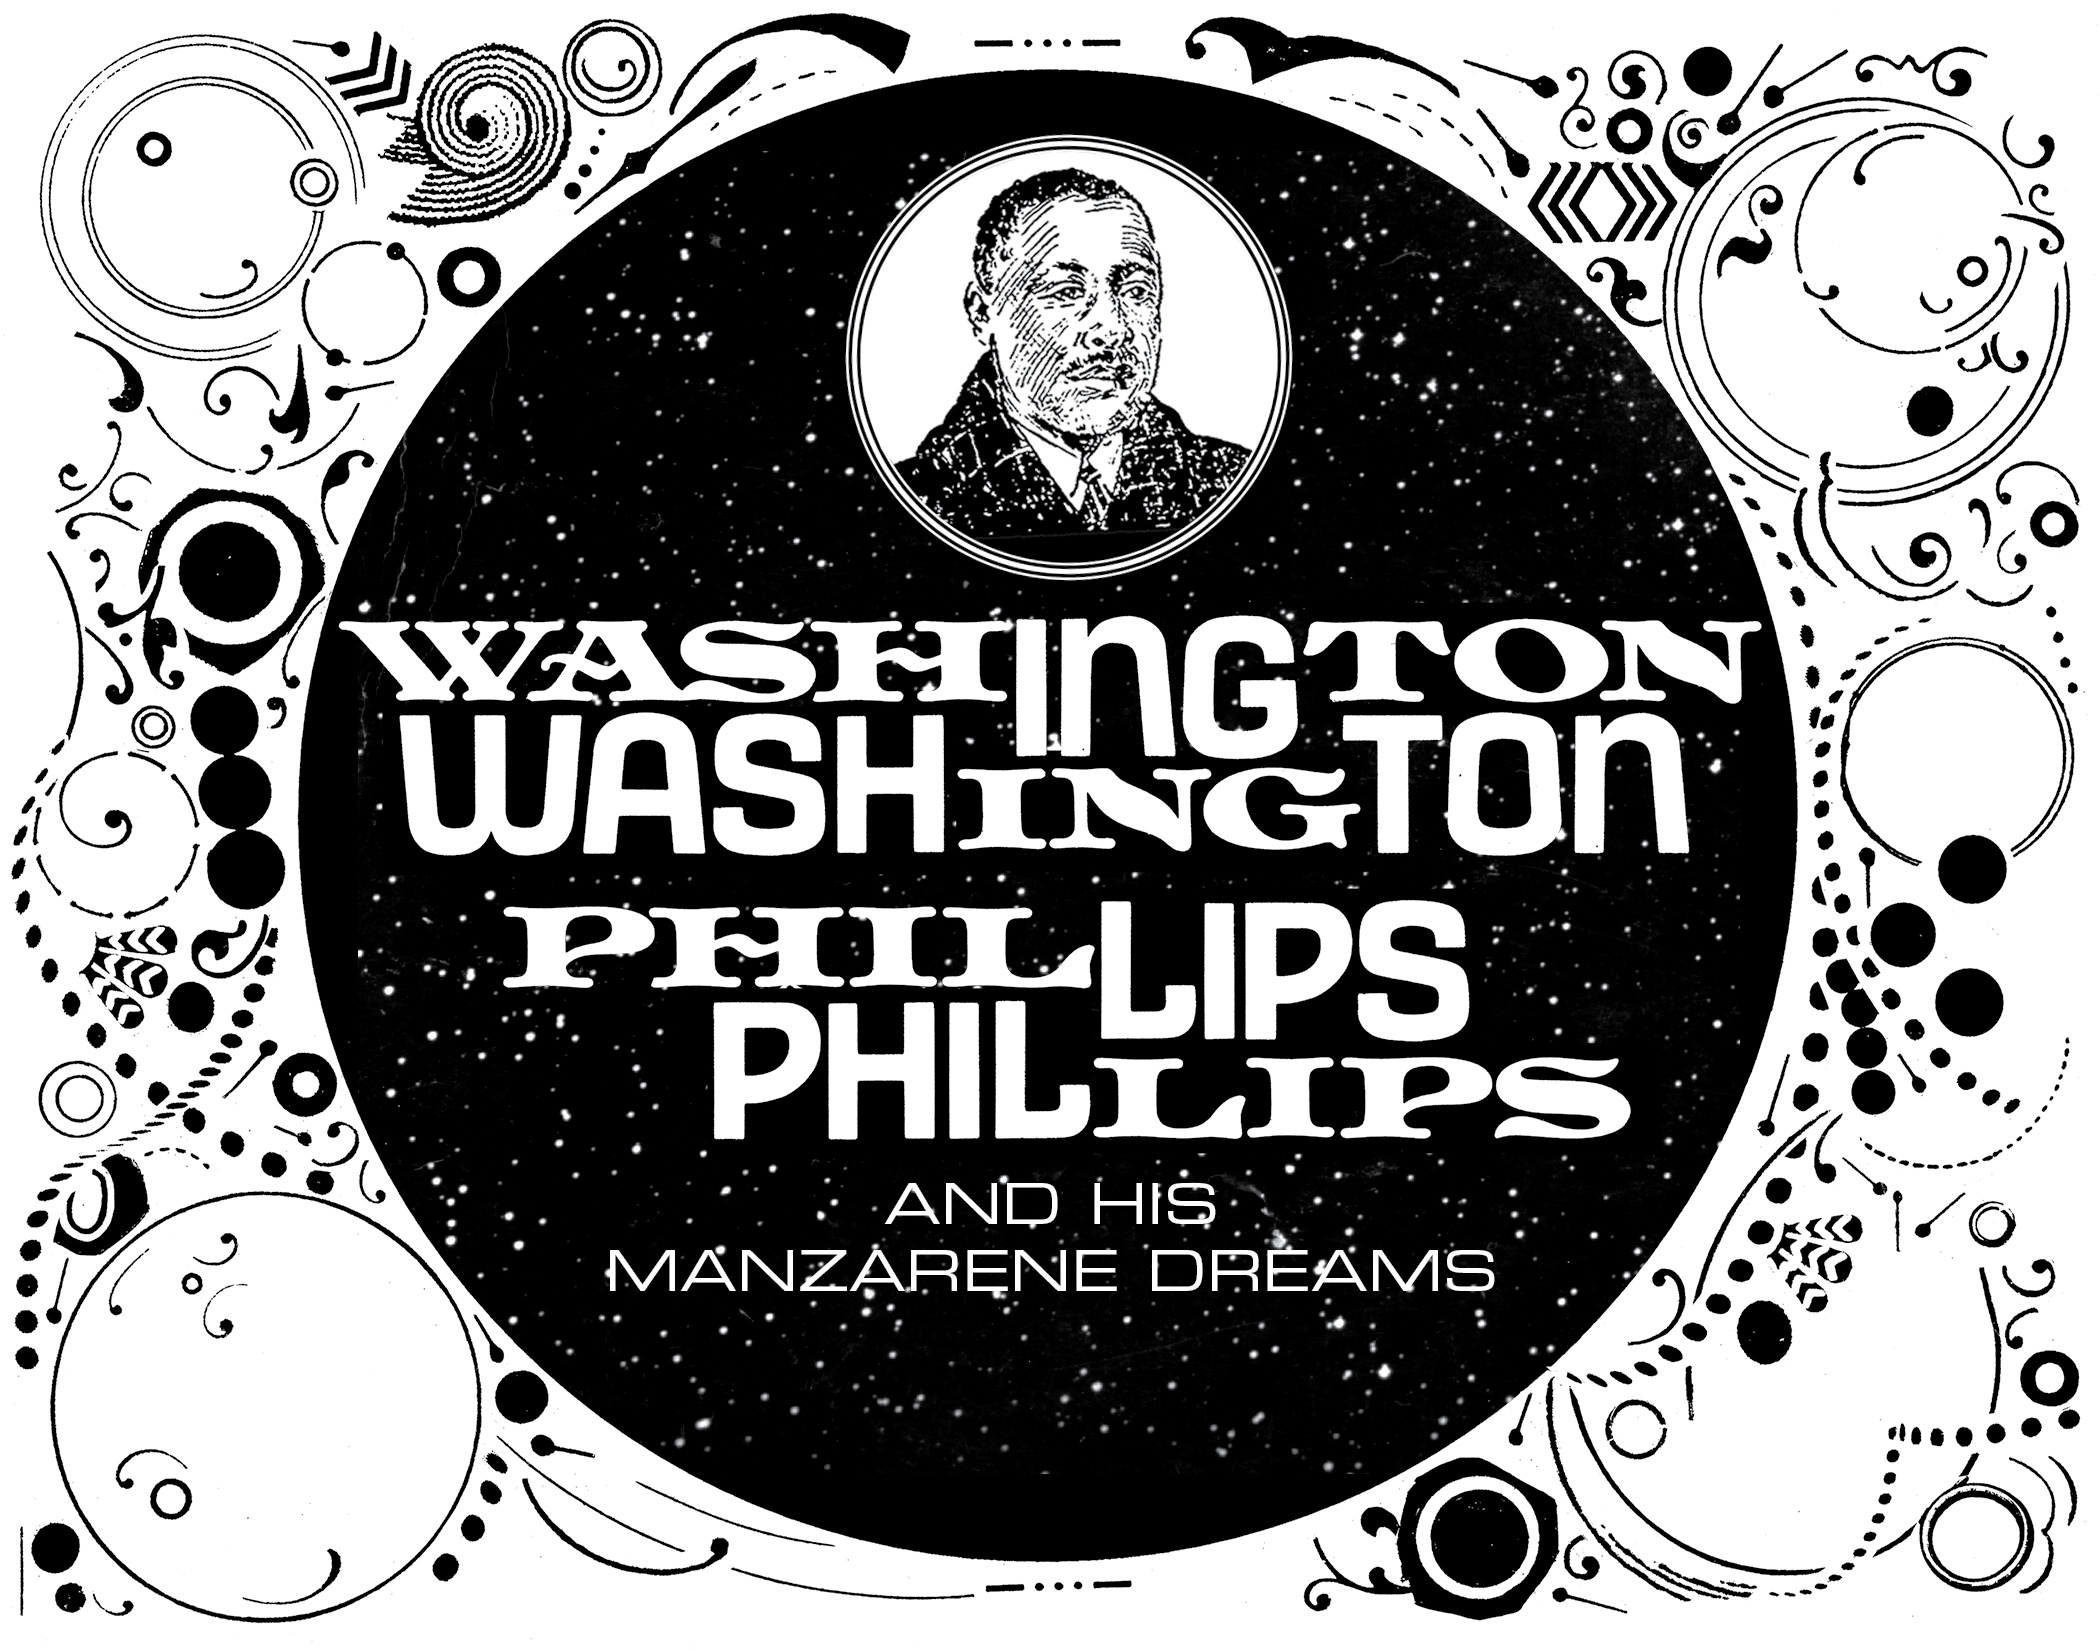 Signed copies of Washington Phillips book/CD $25